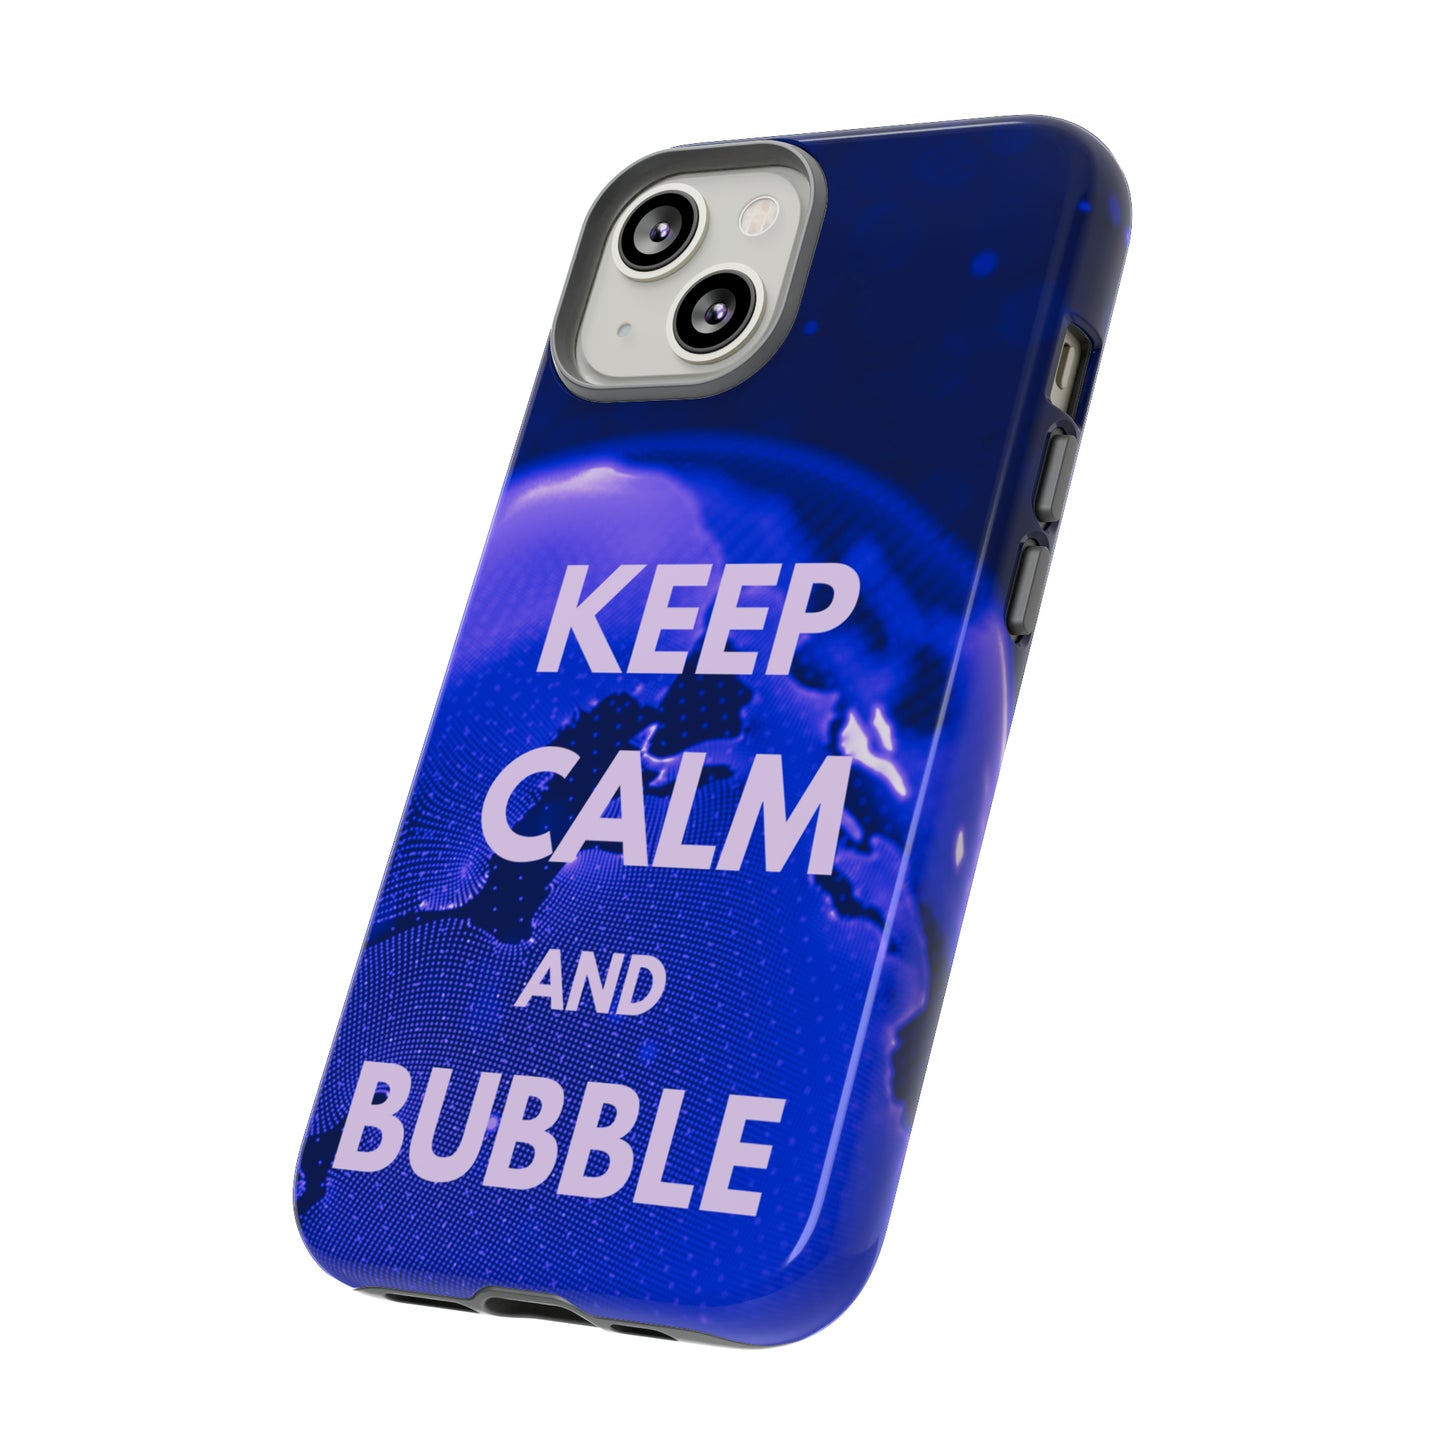 Keep Calm and Bubble Destiny 2 Themed Phone Case